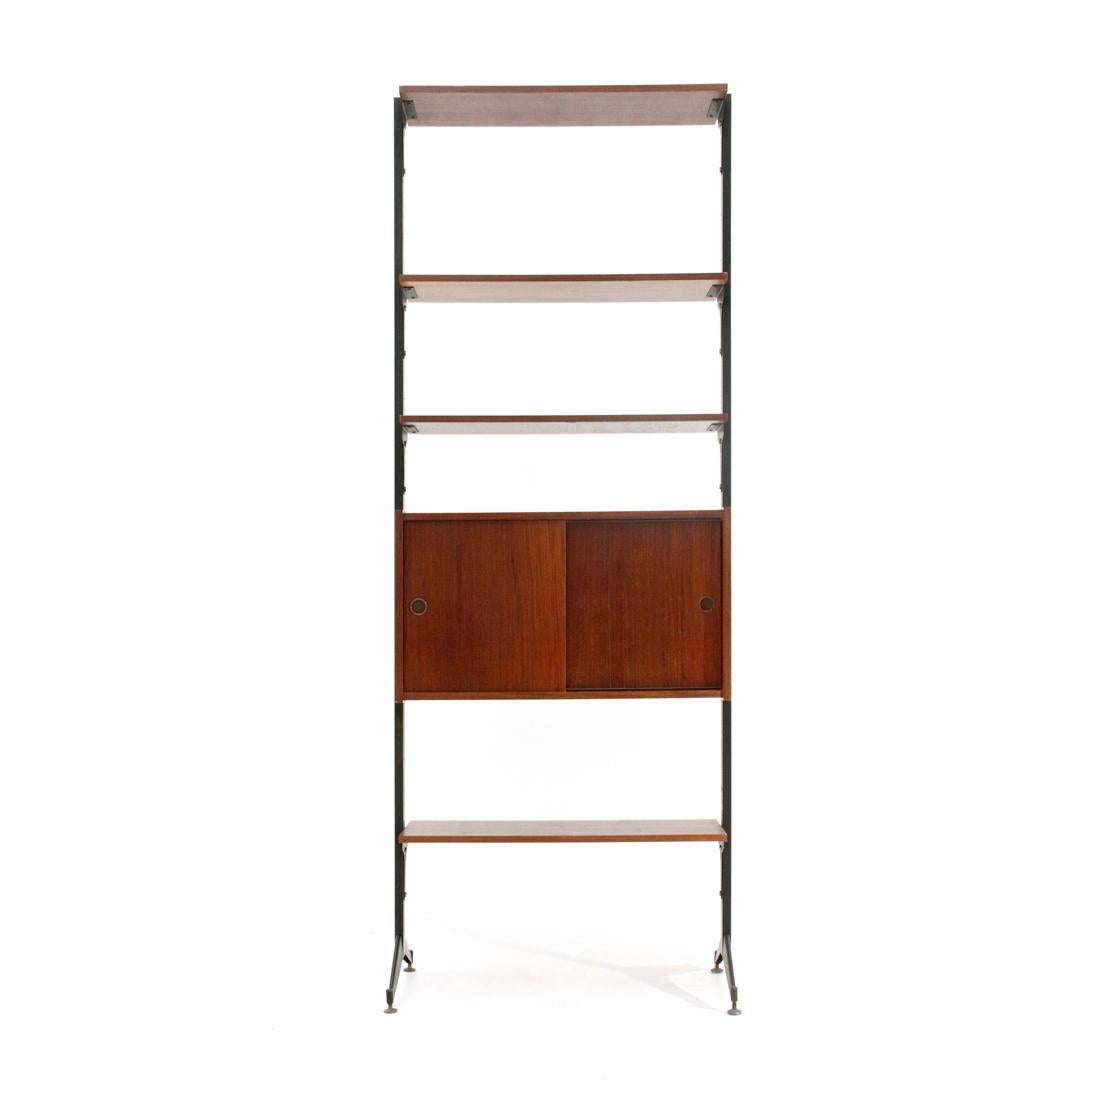 Italian manufacture bookcase produced in the 1960s.
Uprights in black painted metal and brass feet adjustable in height.
Storage compartment and shelves in teak veneered wood.
Storage compartment with sliding doors and plastic handles.
Good